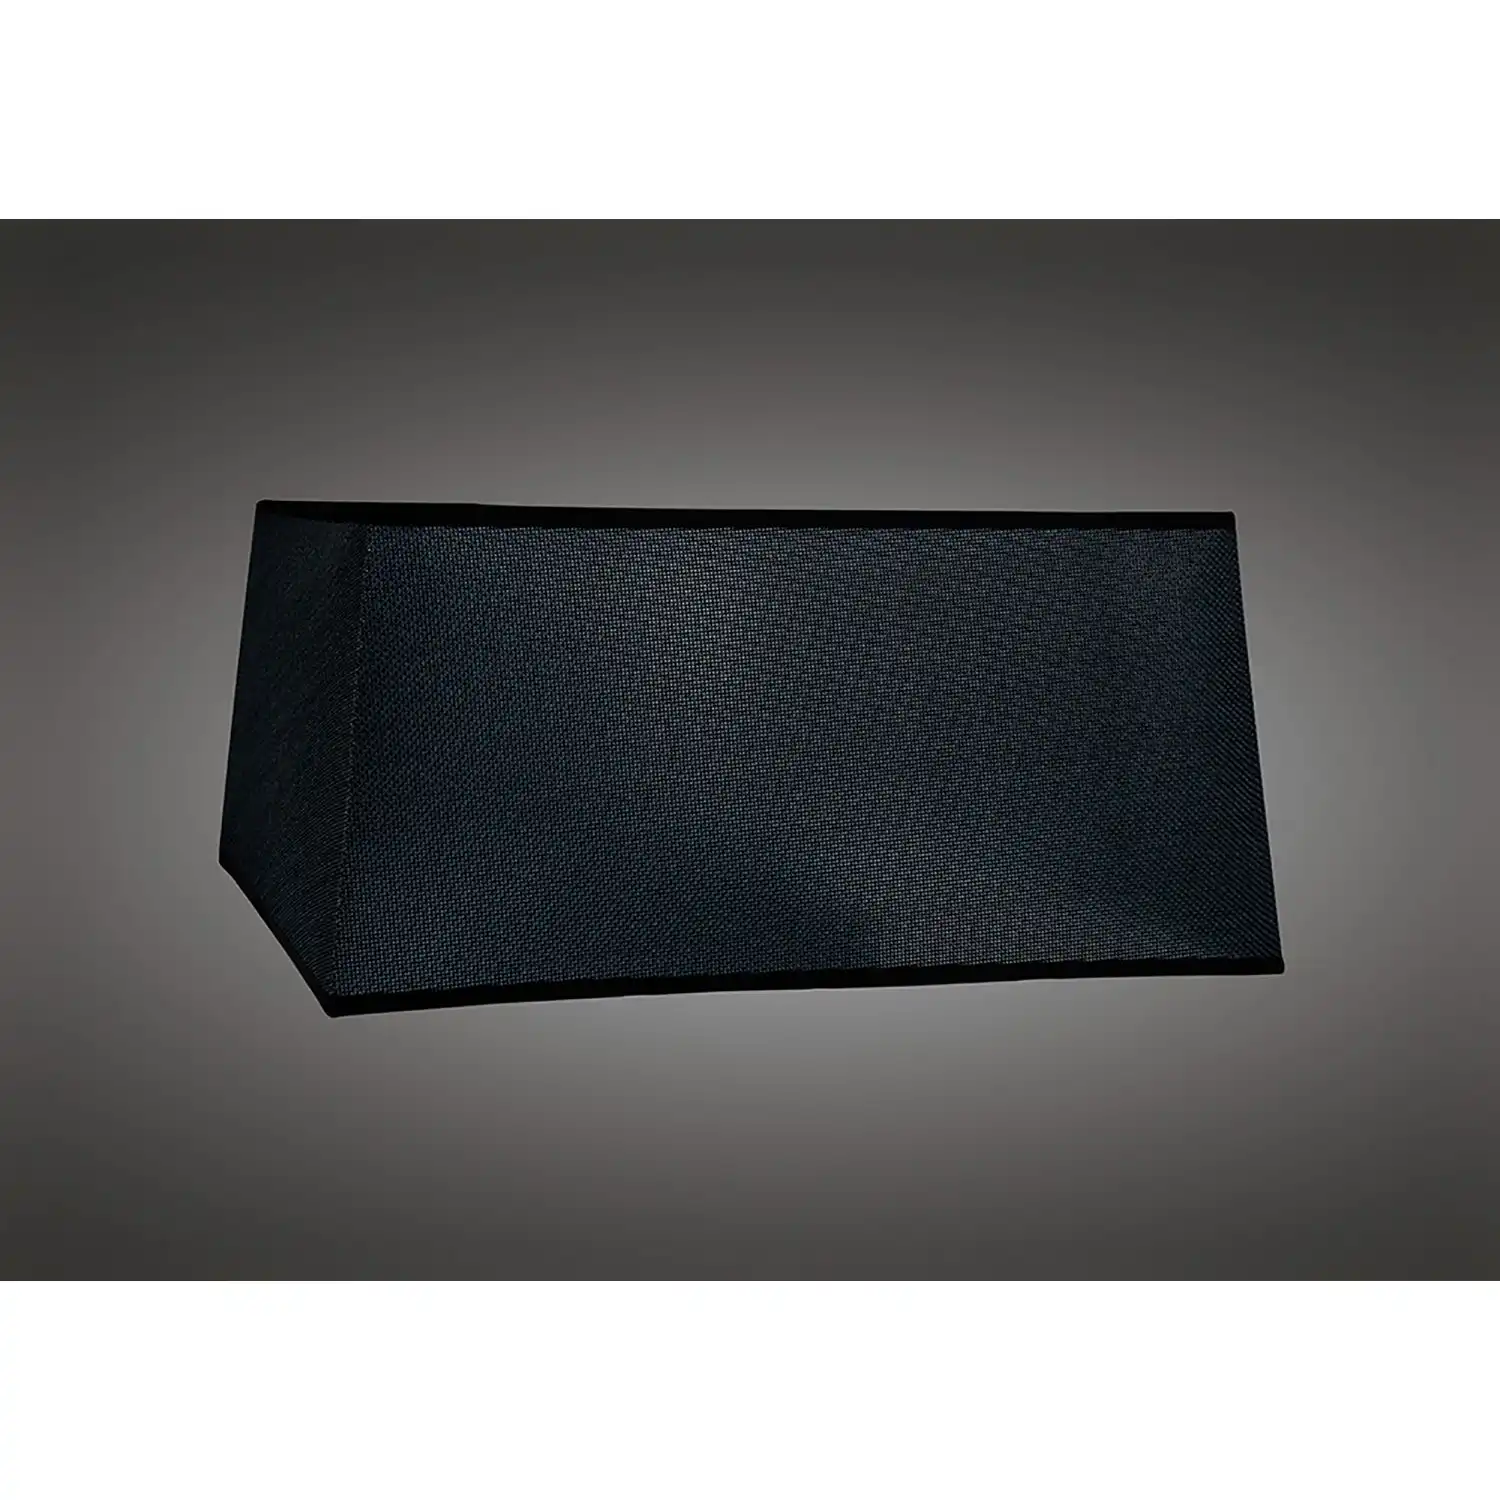 Habana Black Square Shade, 450 450x215mm, Suitable for Floor Lamps